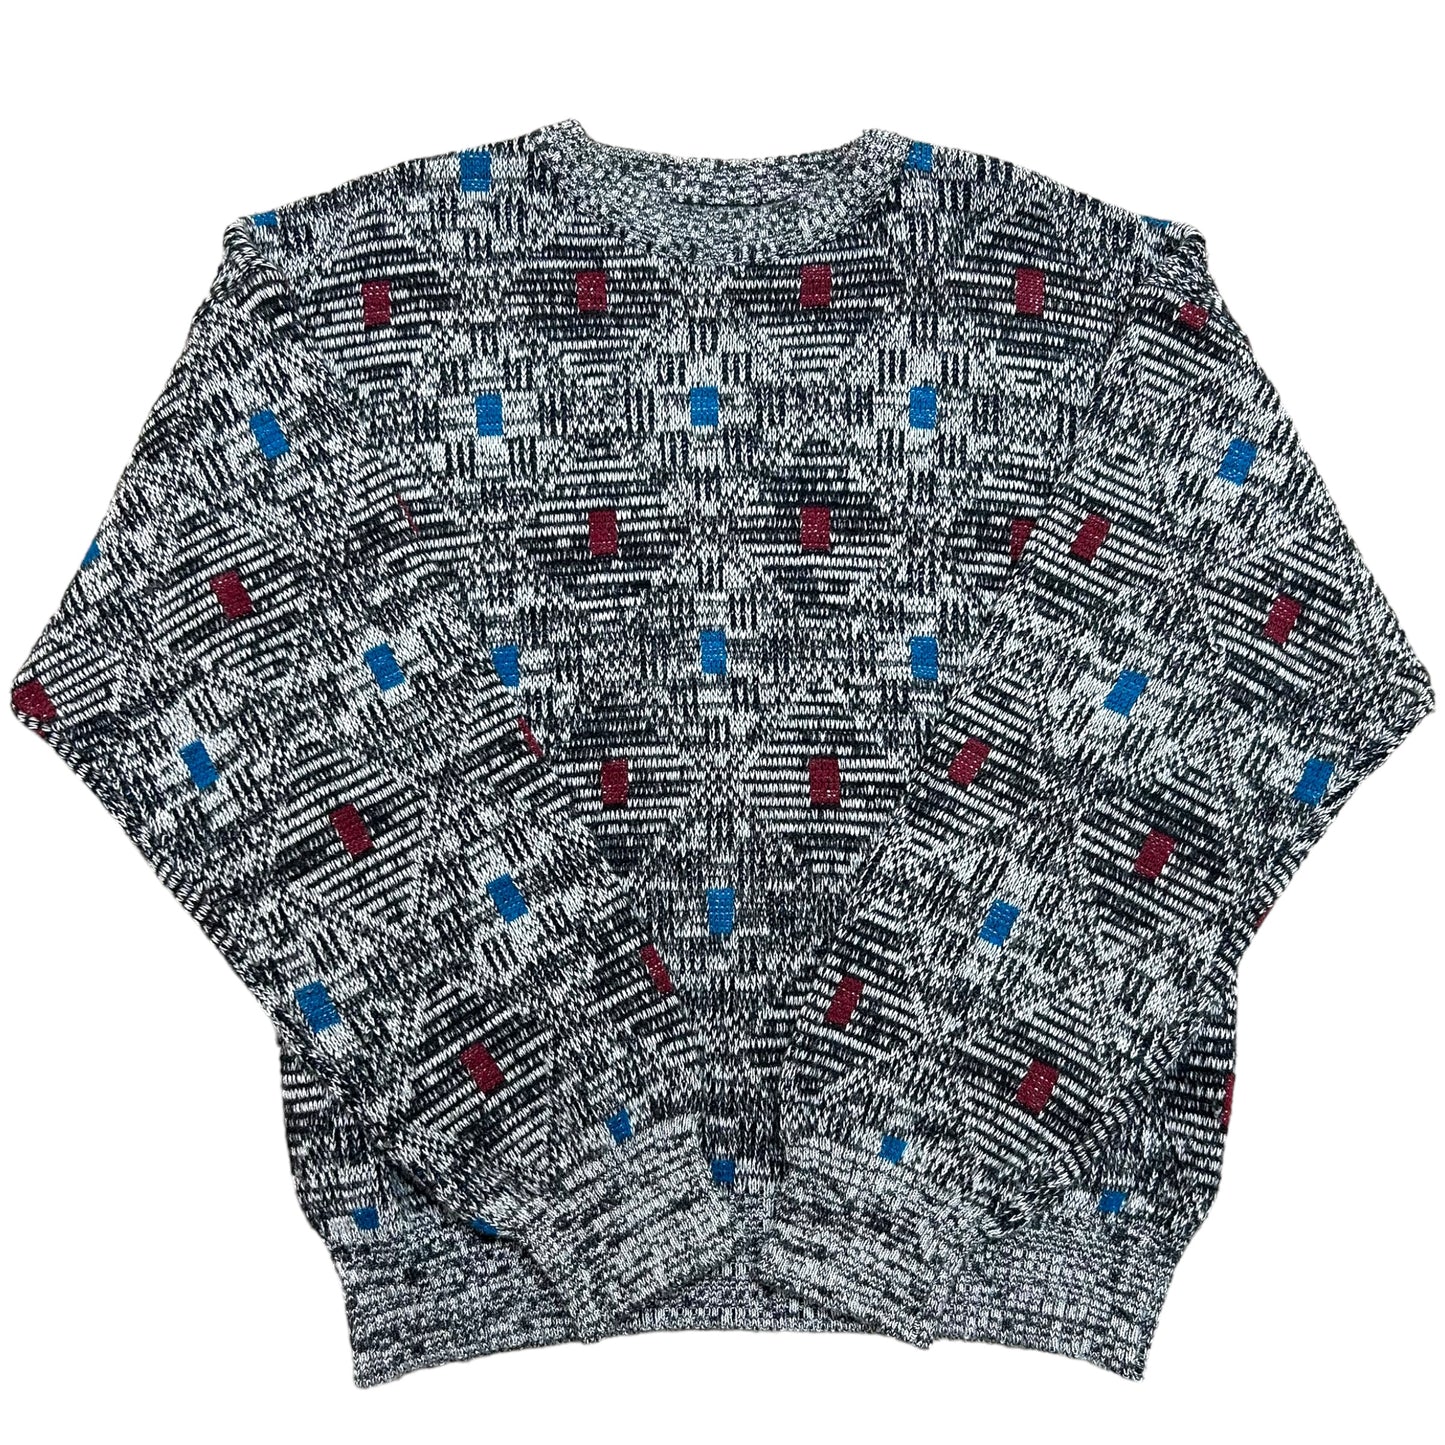 Vintage 1990s “Shades” Geometric Design Grey/Red/Blue Knit Sweater - Size Large